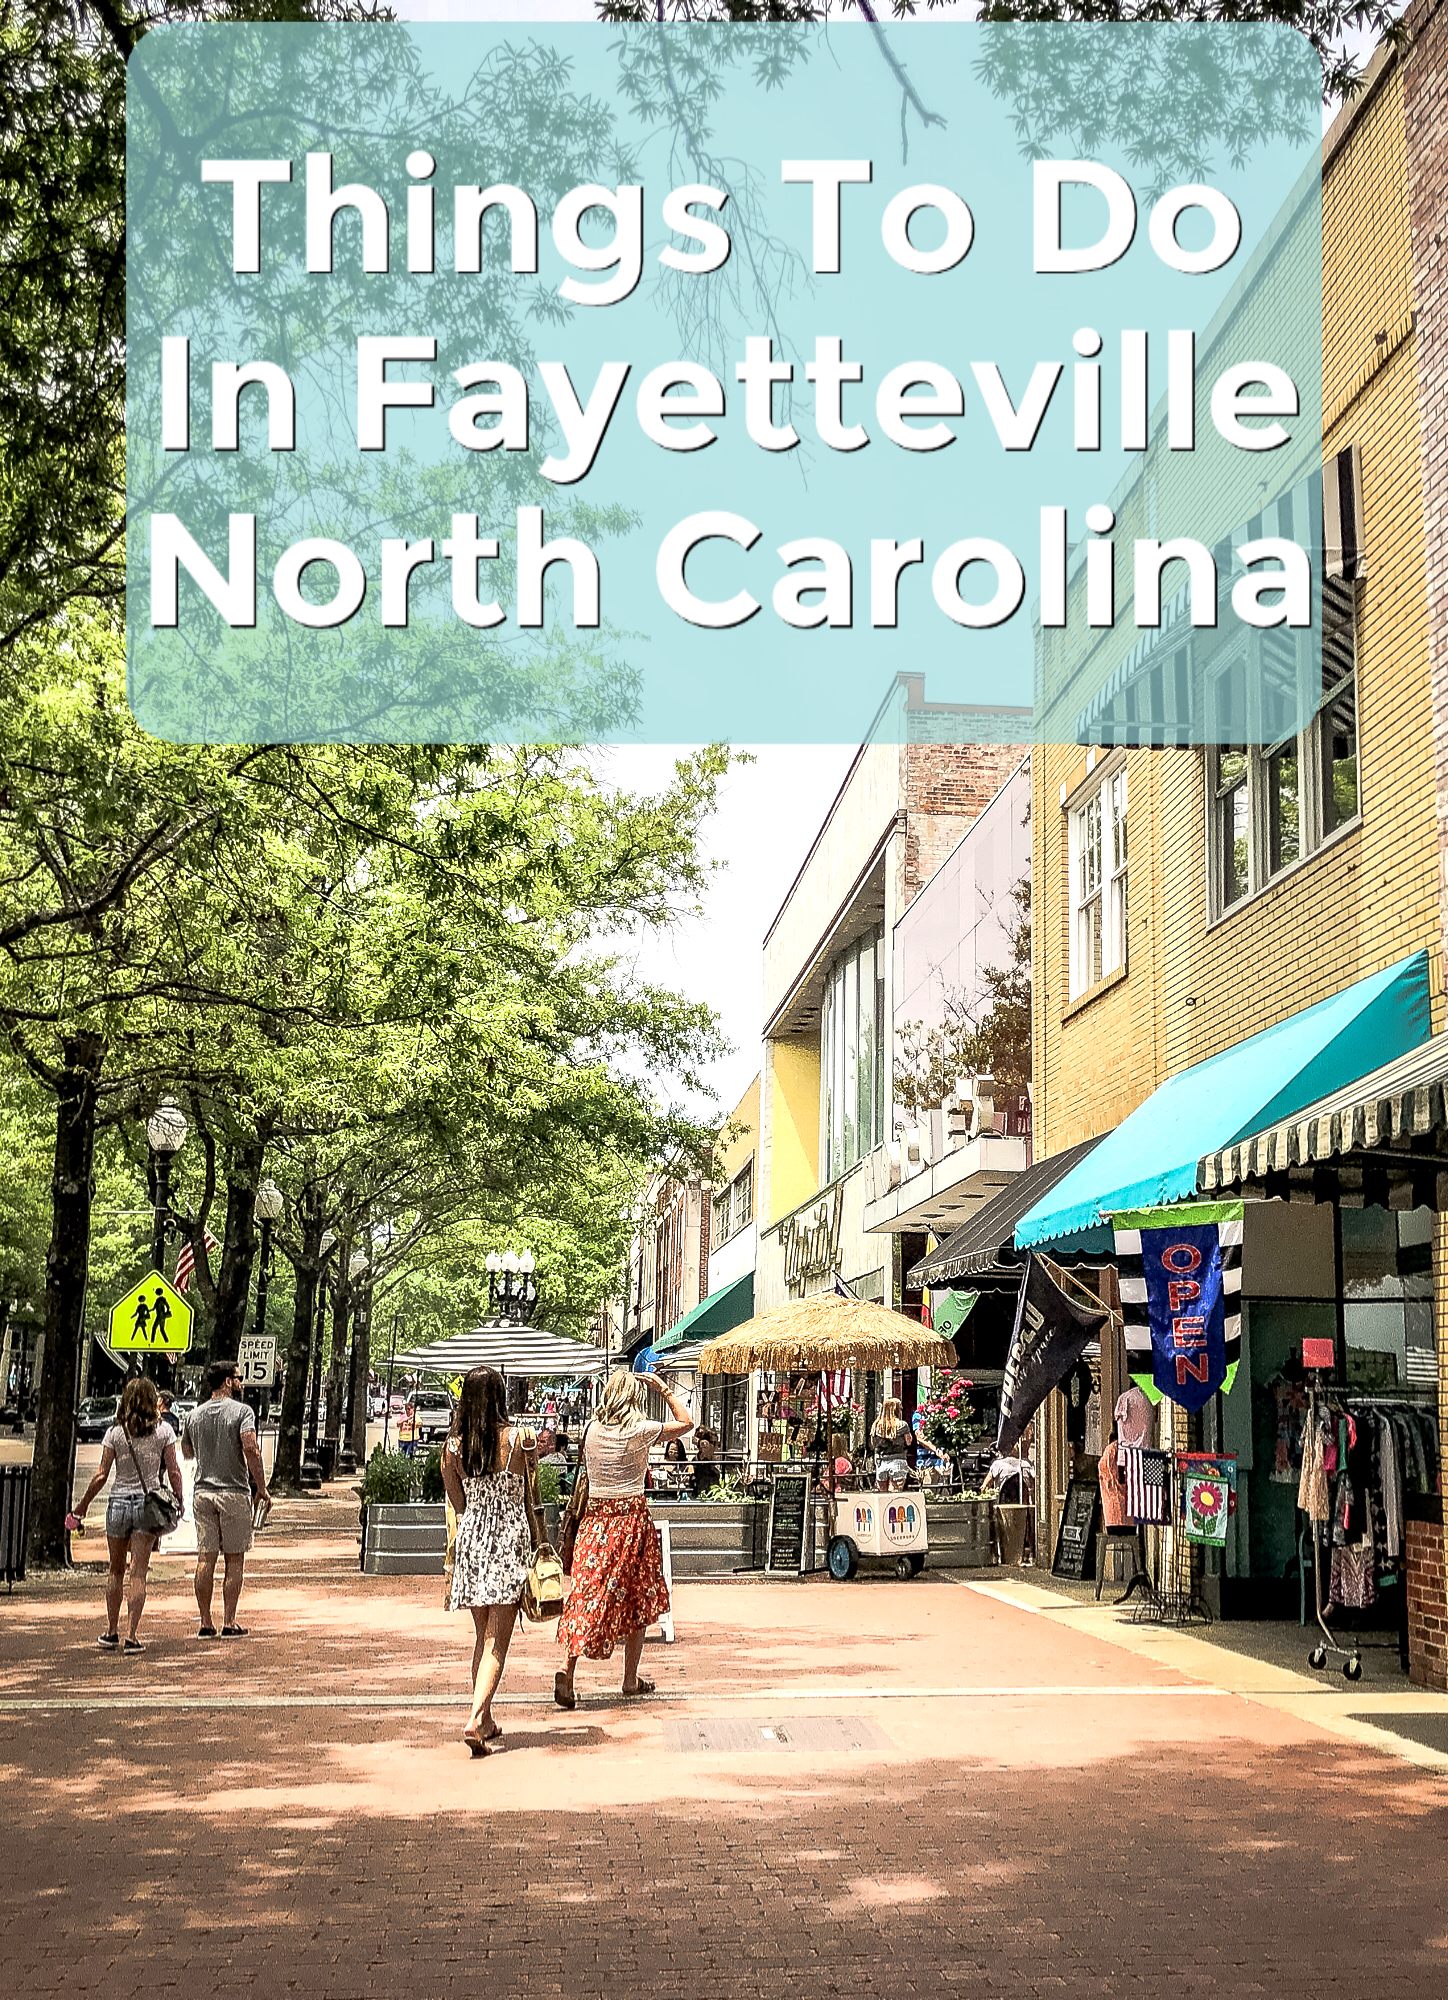 Vist Fayetteville North Carolina- The Best Things To Do in Fayetteville NC by popular North Carolina fashion and lifestyle blogger and youtuber Jessica Linn